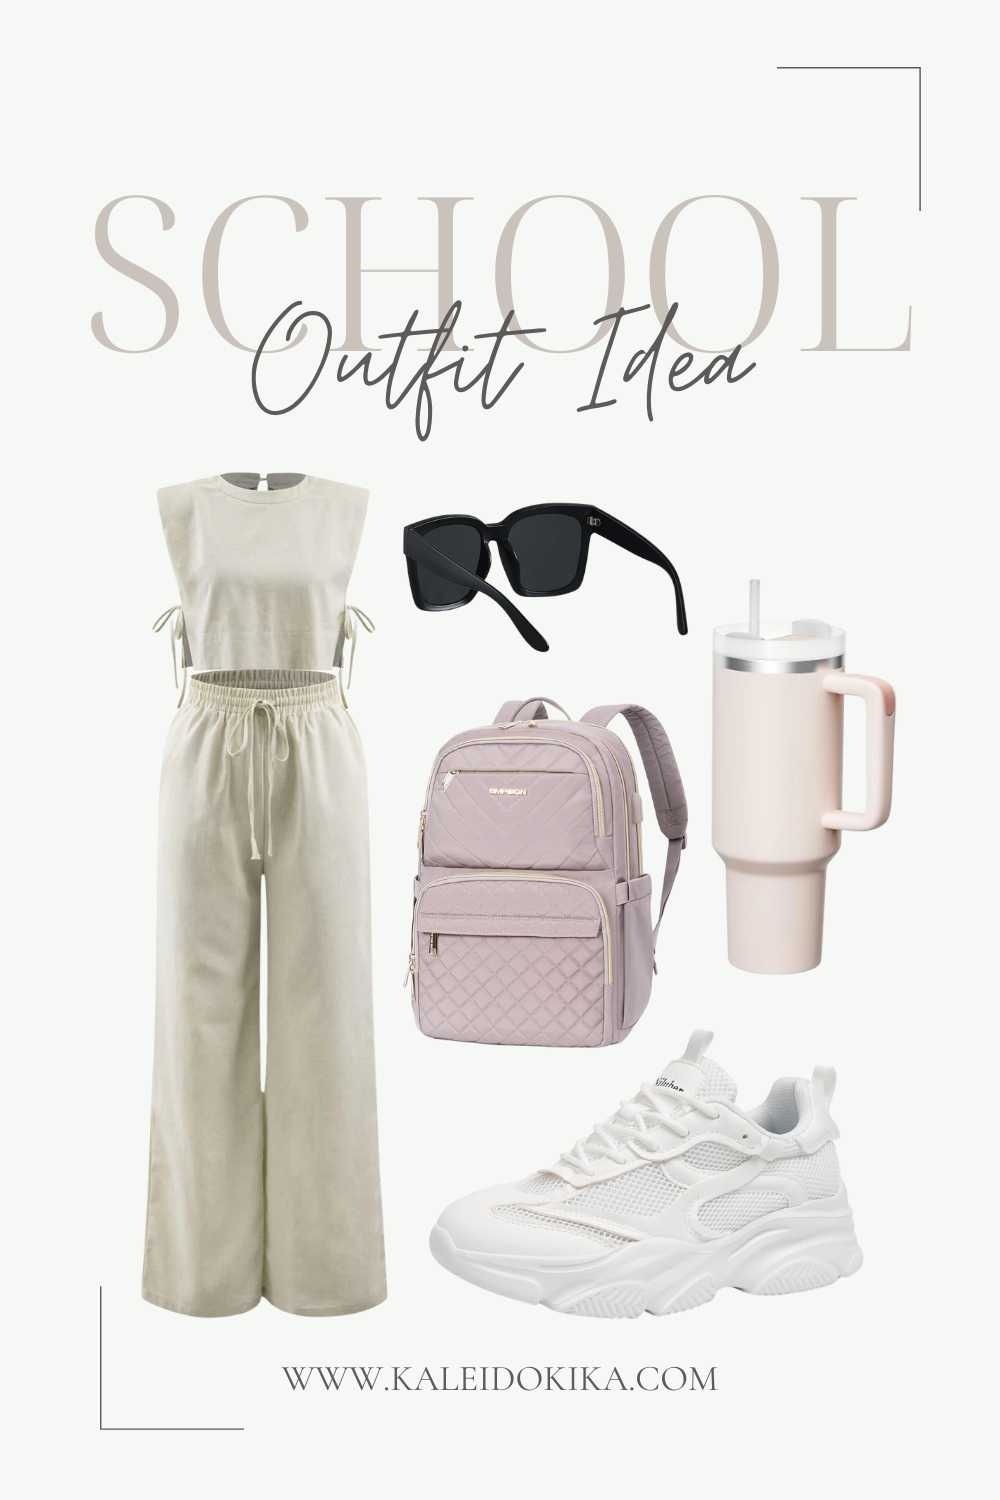 Cute and cozy outfit ideas for school